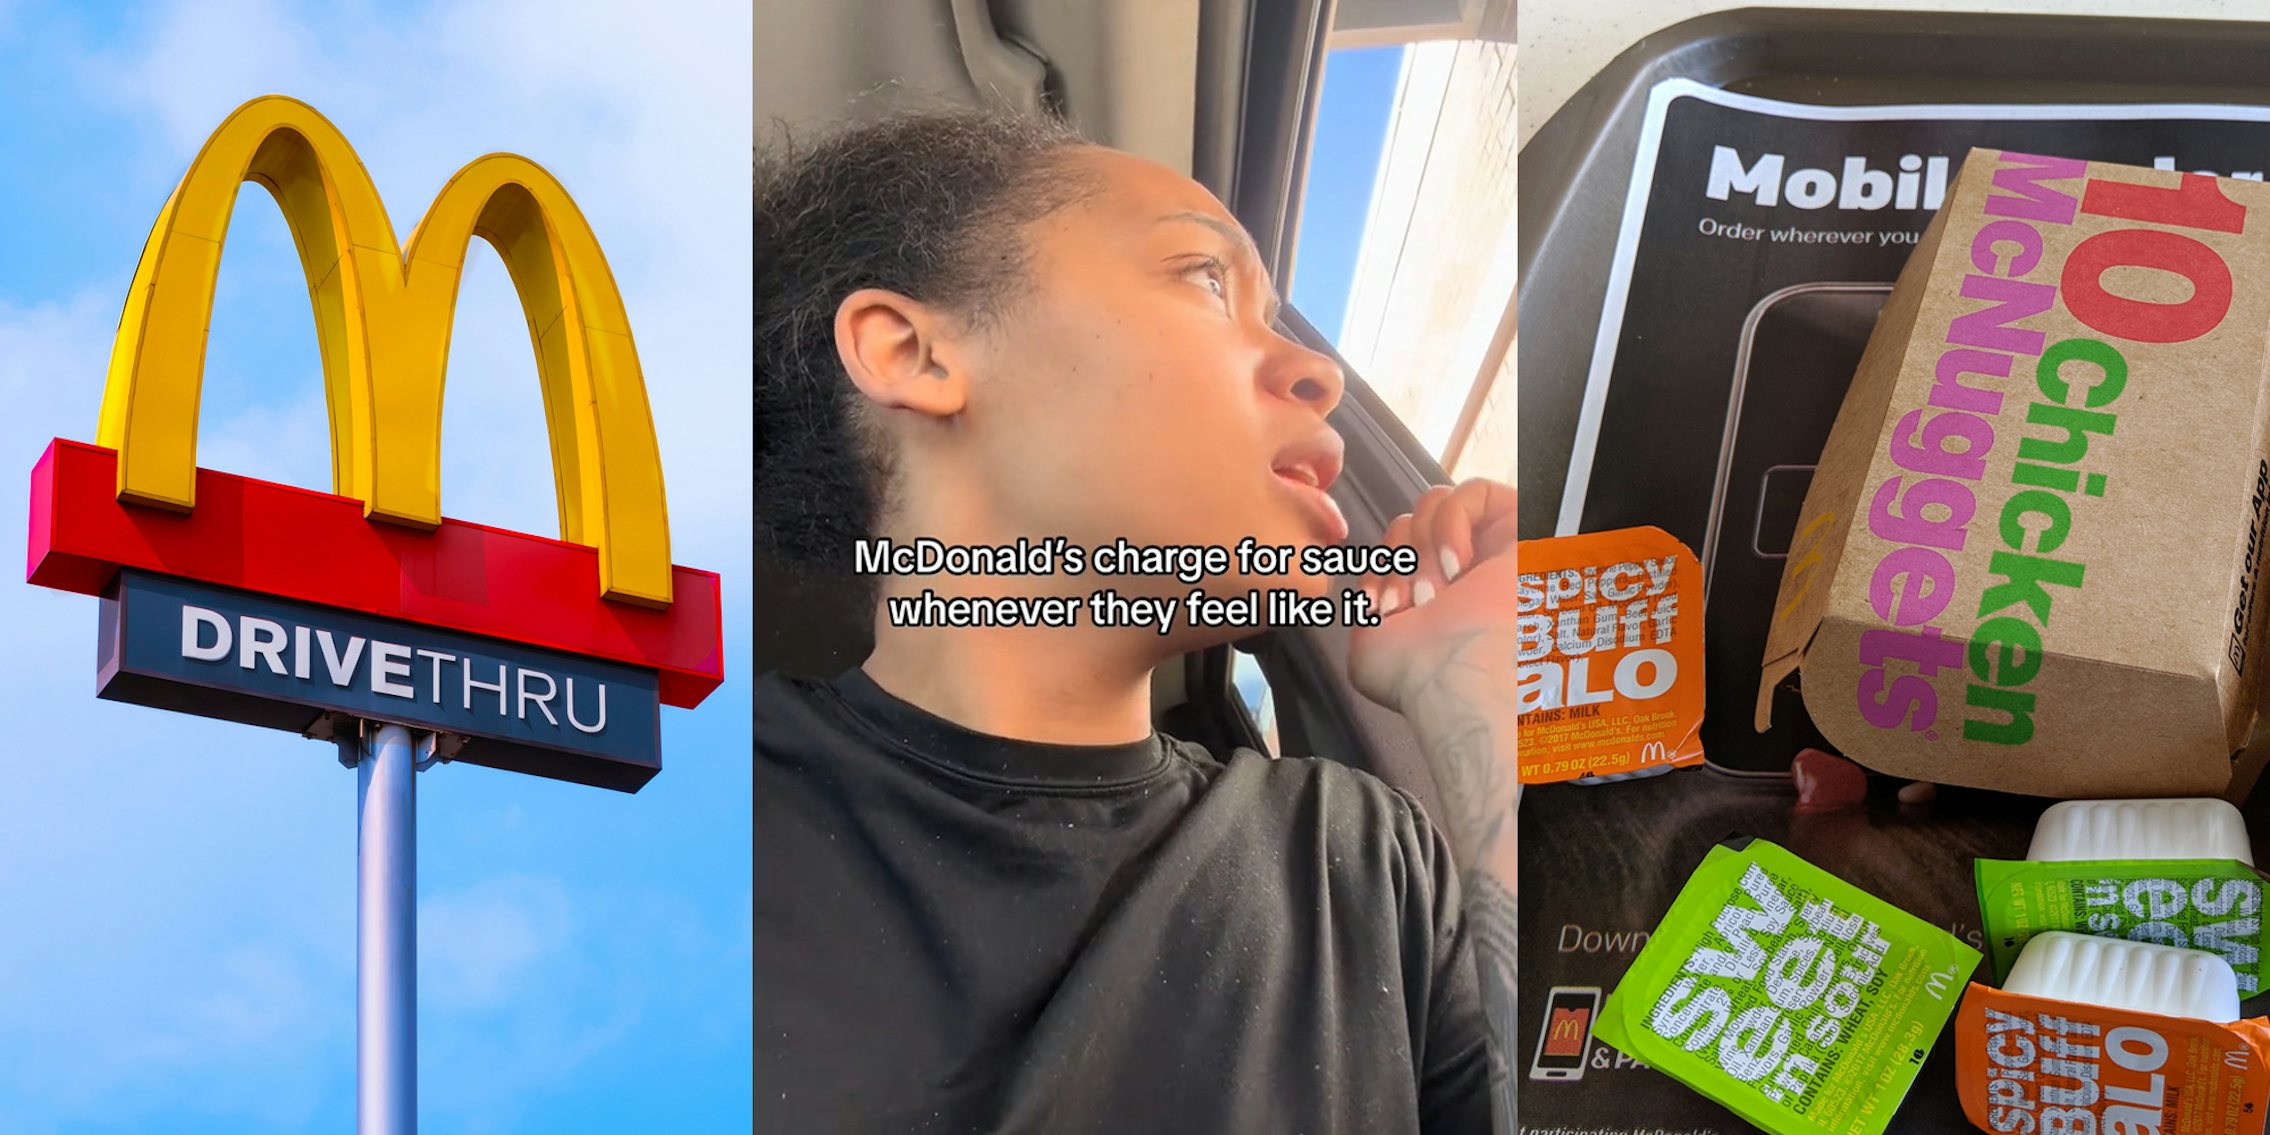 McDonald's drive thru sign in front of blue sky (l) McDonald's customer speaking at drive thru with caption 'McDonald's charge for sauce whenever they feel like it.' (c) McDonald's sauces with nuggets (r)